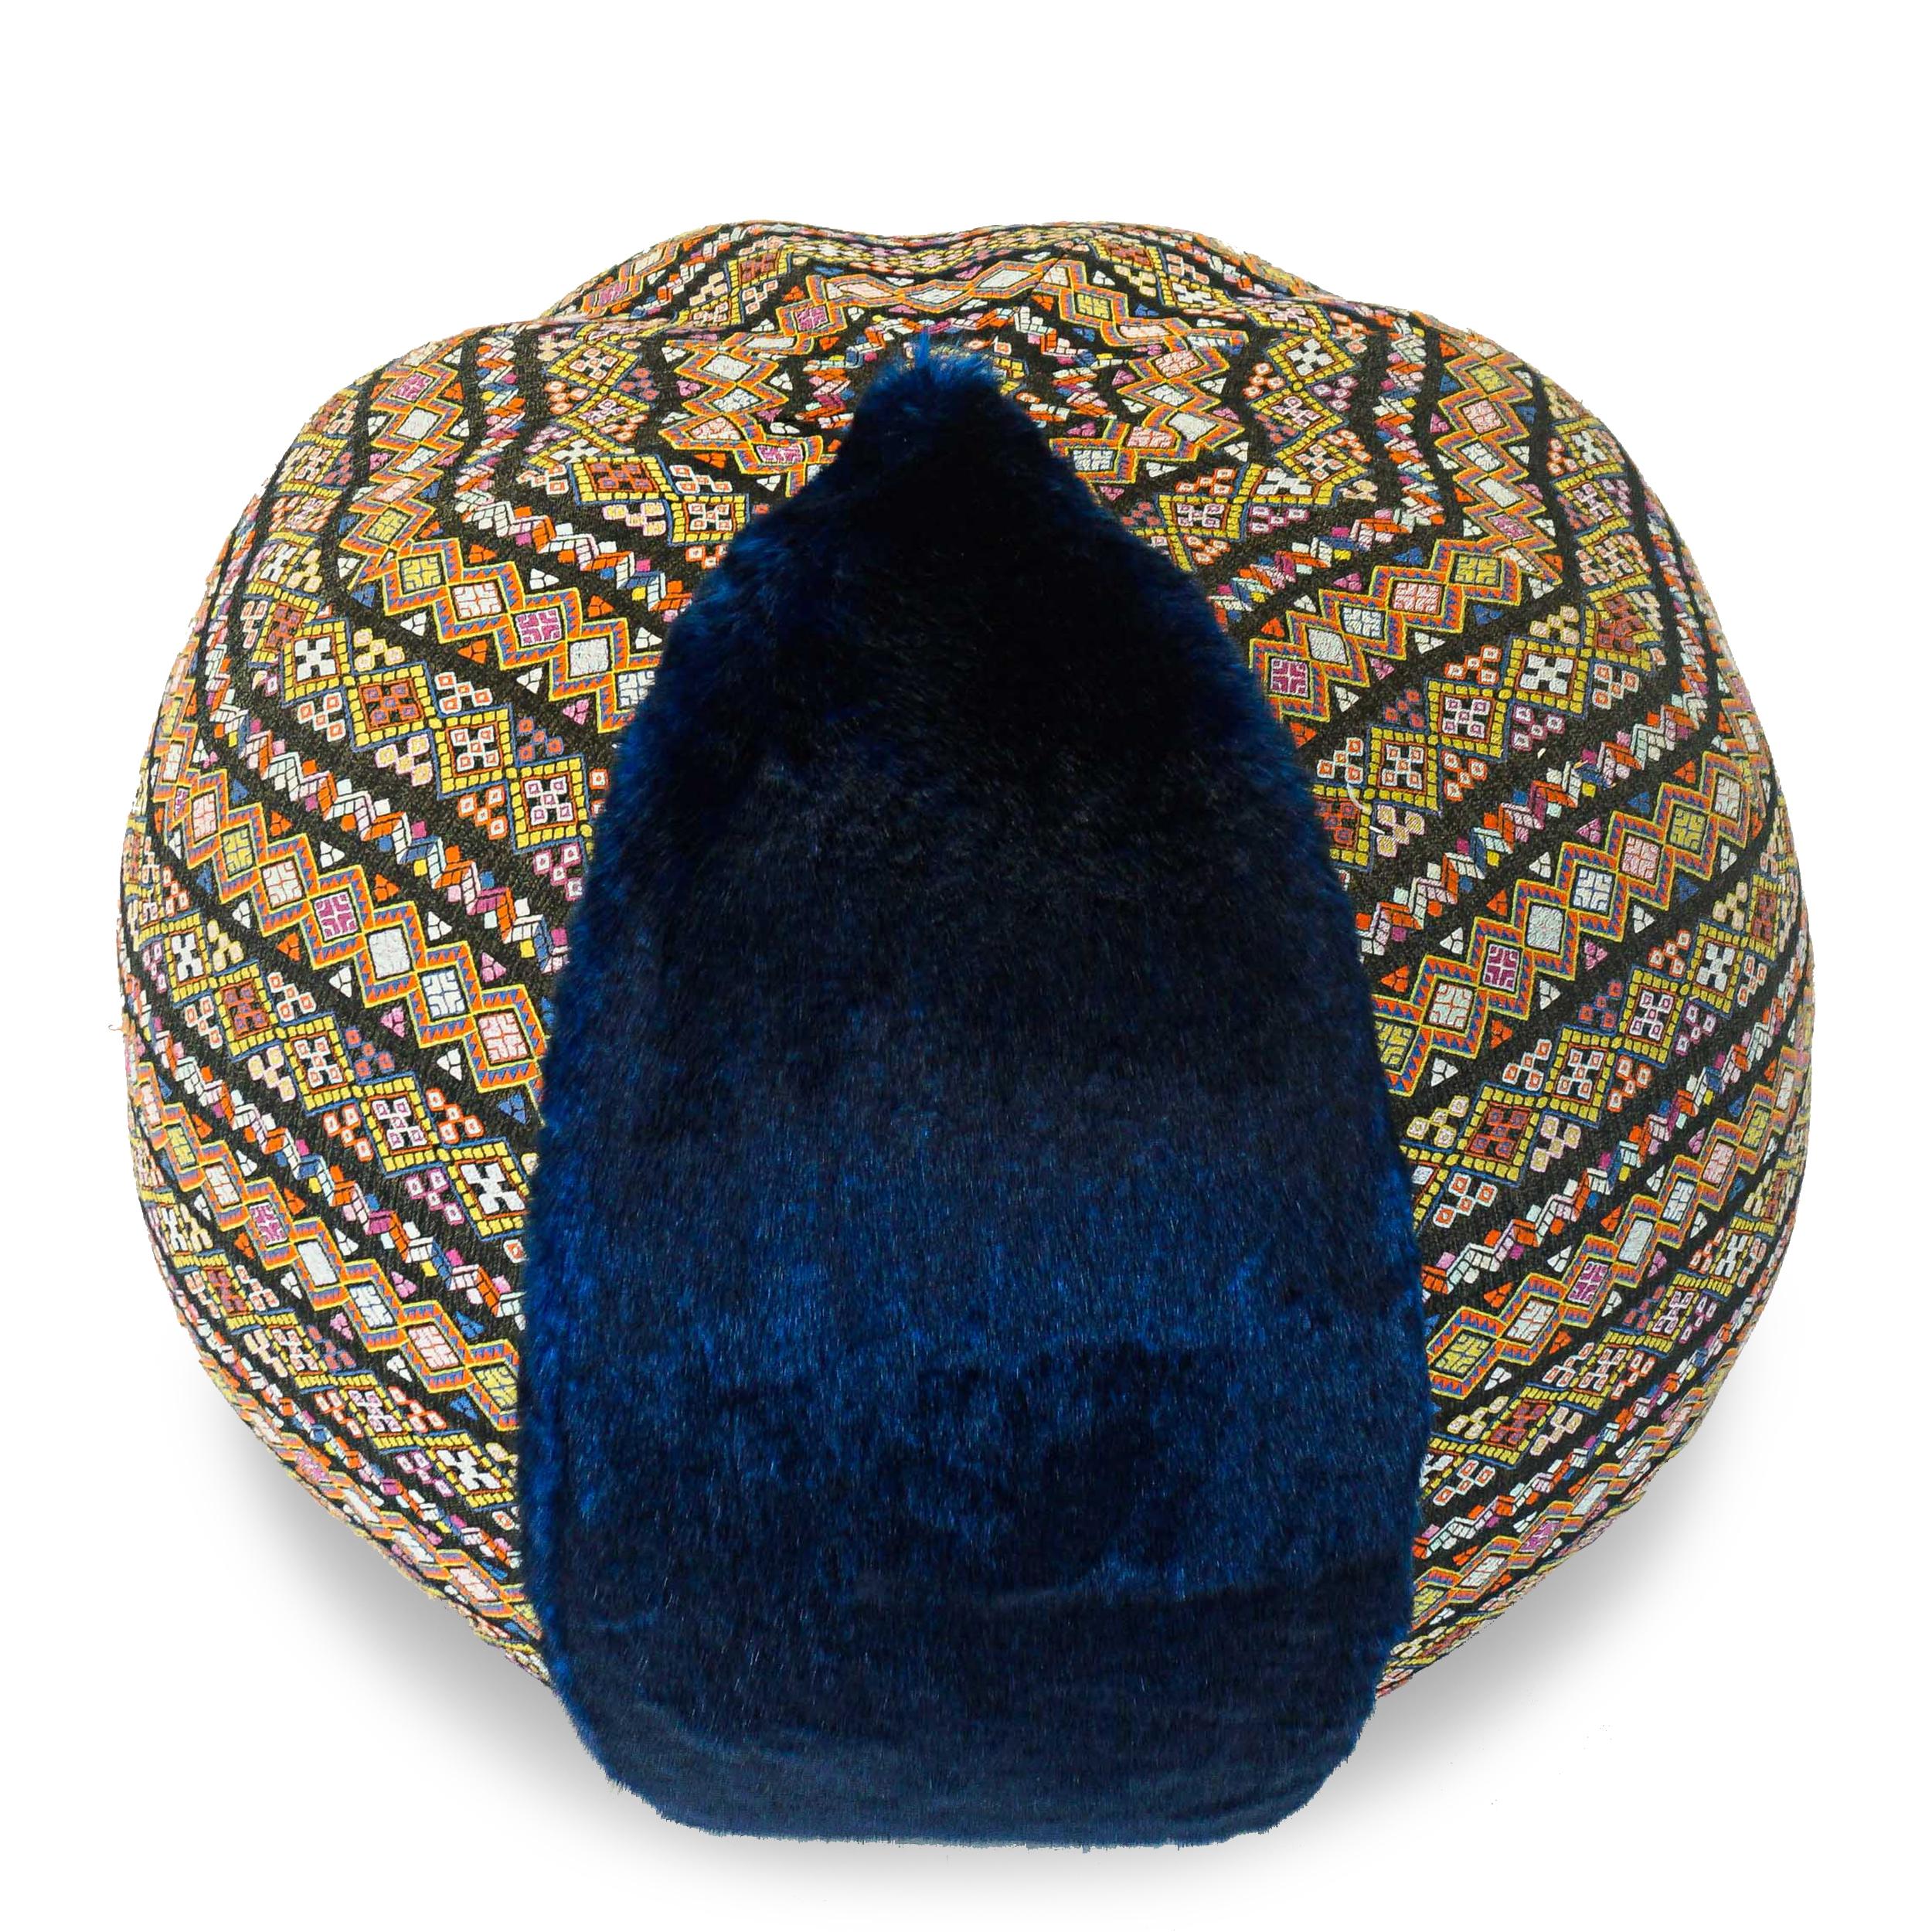 Handmade pouf/ottoman covered in vibrant blue faux fur & patterned Bohemia style fabric. Light enough to move around as occasional seating without scratching floor, but substantial and firm enough to support a serving tray or adult size bottom